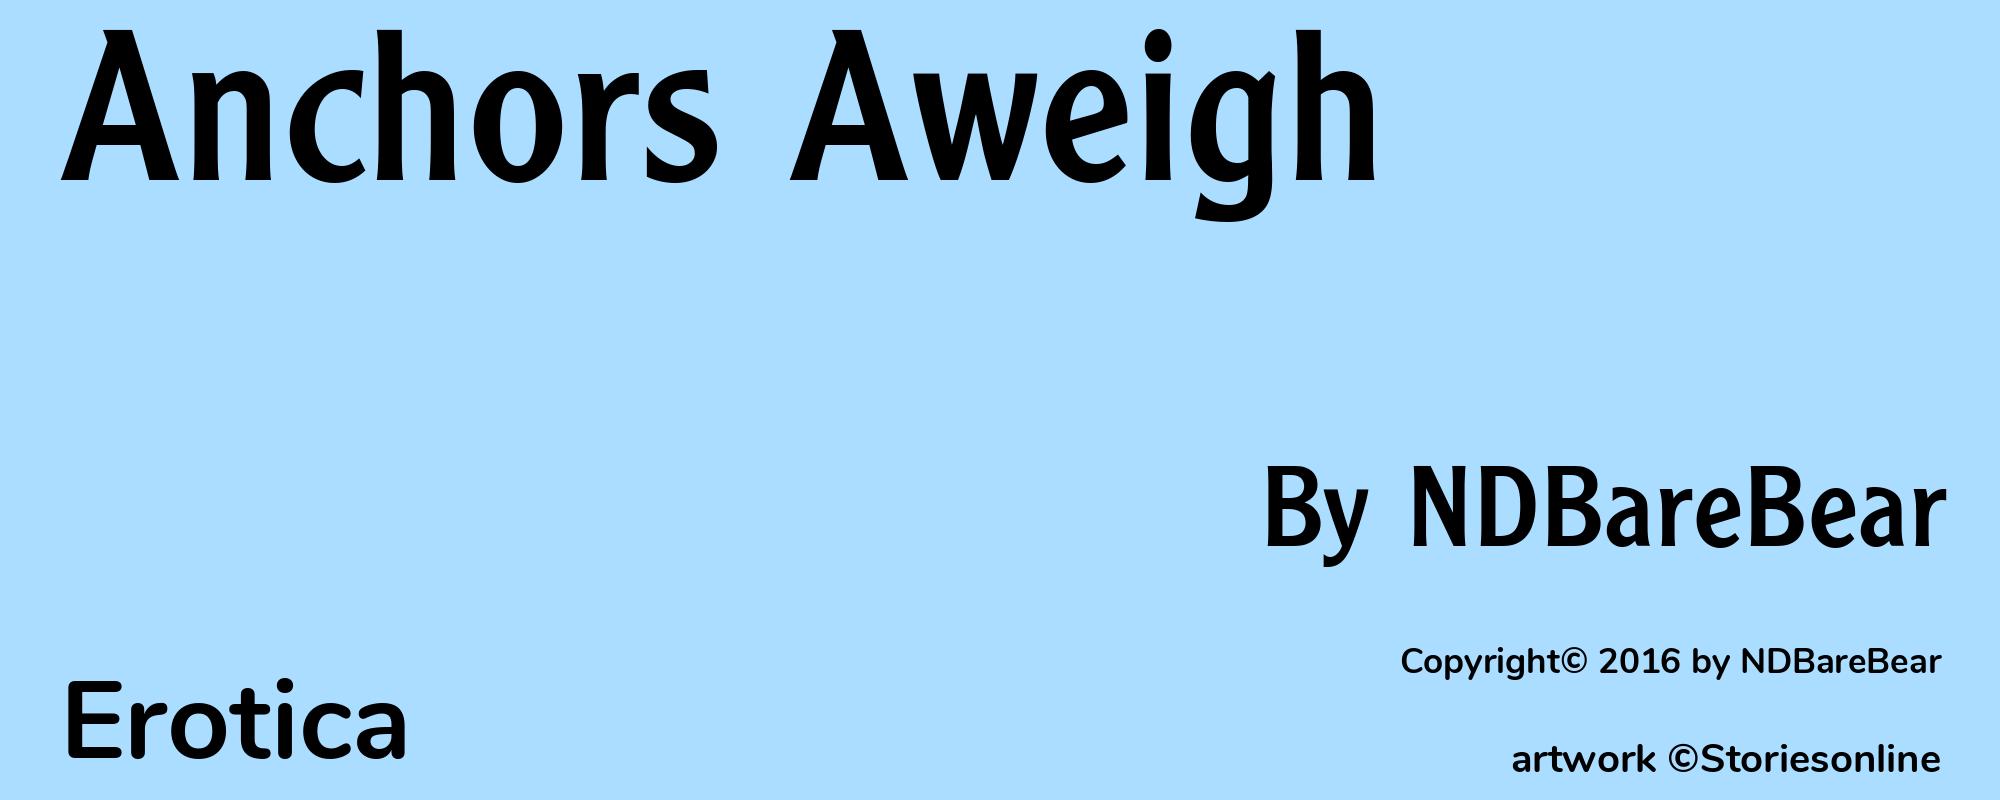 Anchors Aweigh - Cover